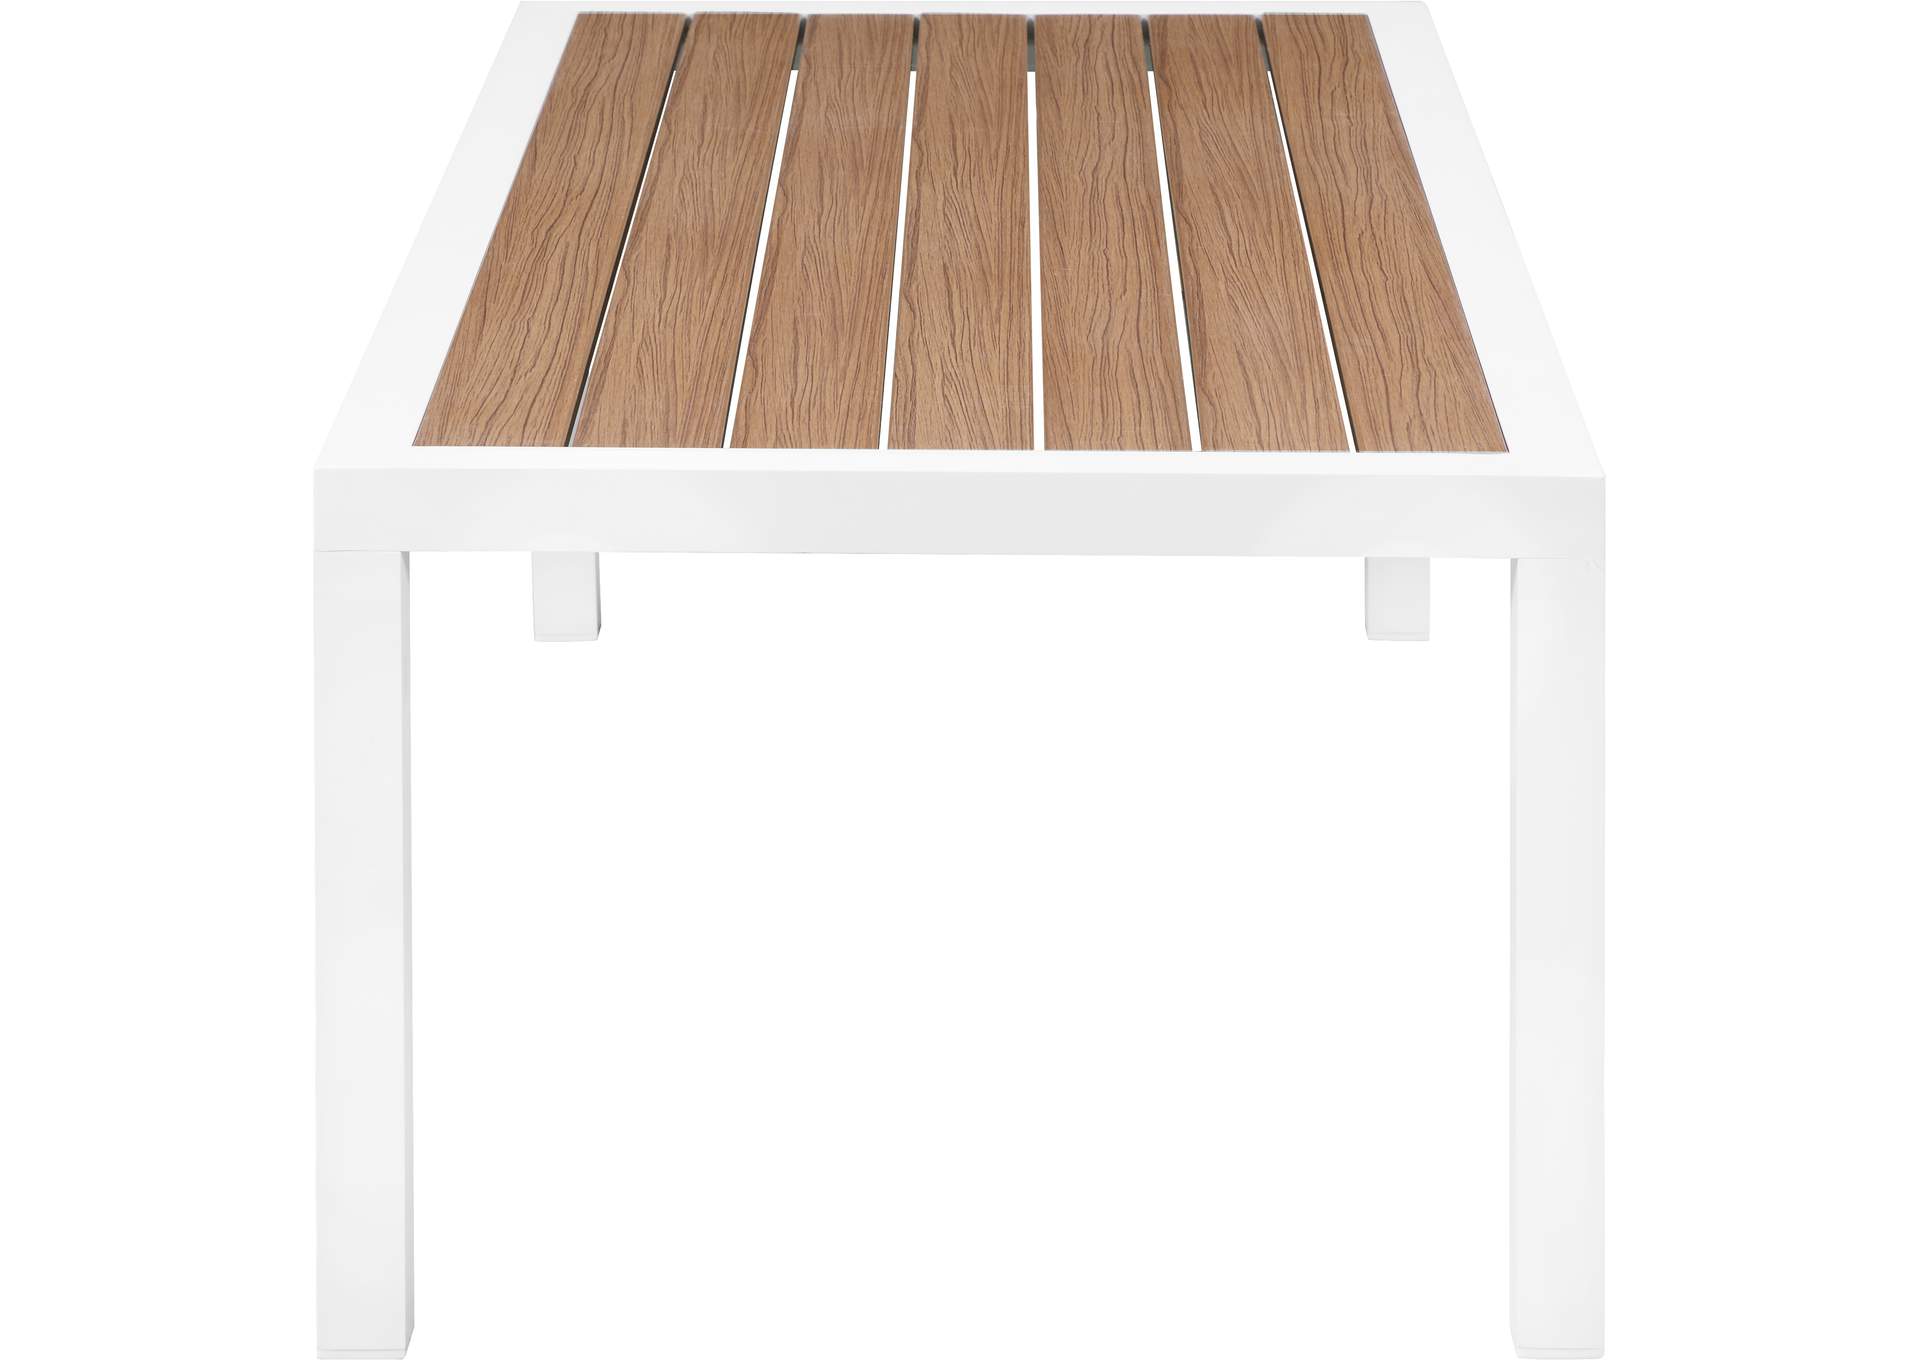 Nizuc Brown Wood Look Accent Paneling Outdoor Patio Aluminum Coffee Table,Meridian Furniture